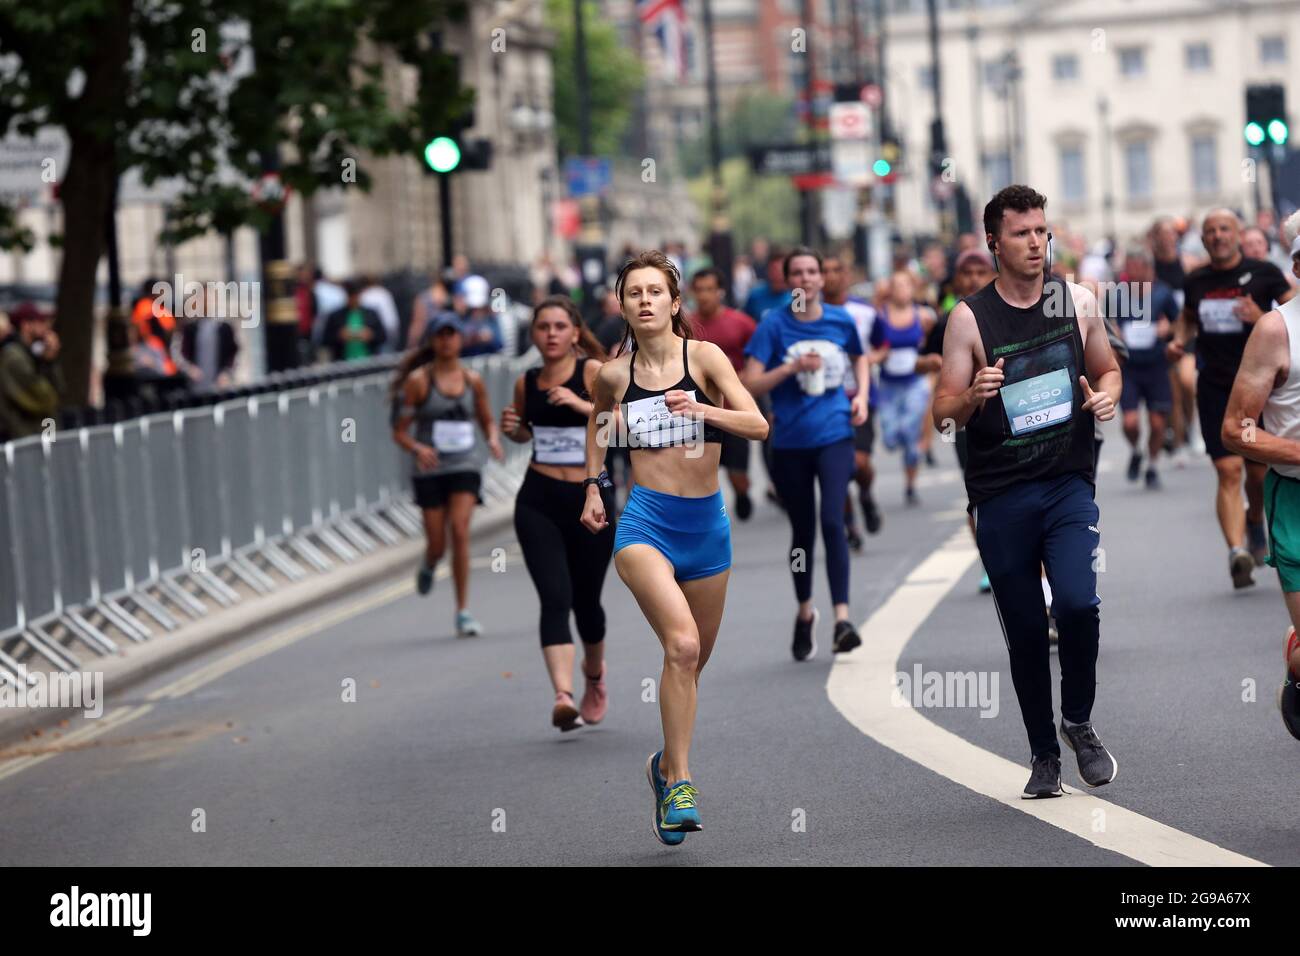 London, England, UK. 25th July, 2021. Runners in central London during the Asics  London 10K. The run is thought to be the largest closed road event since  the start of the coronavirus